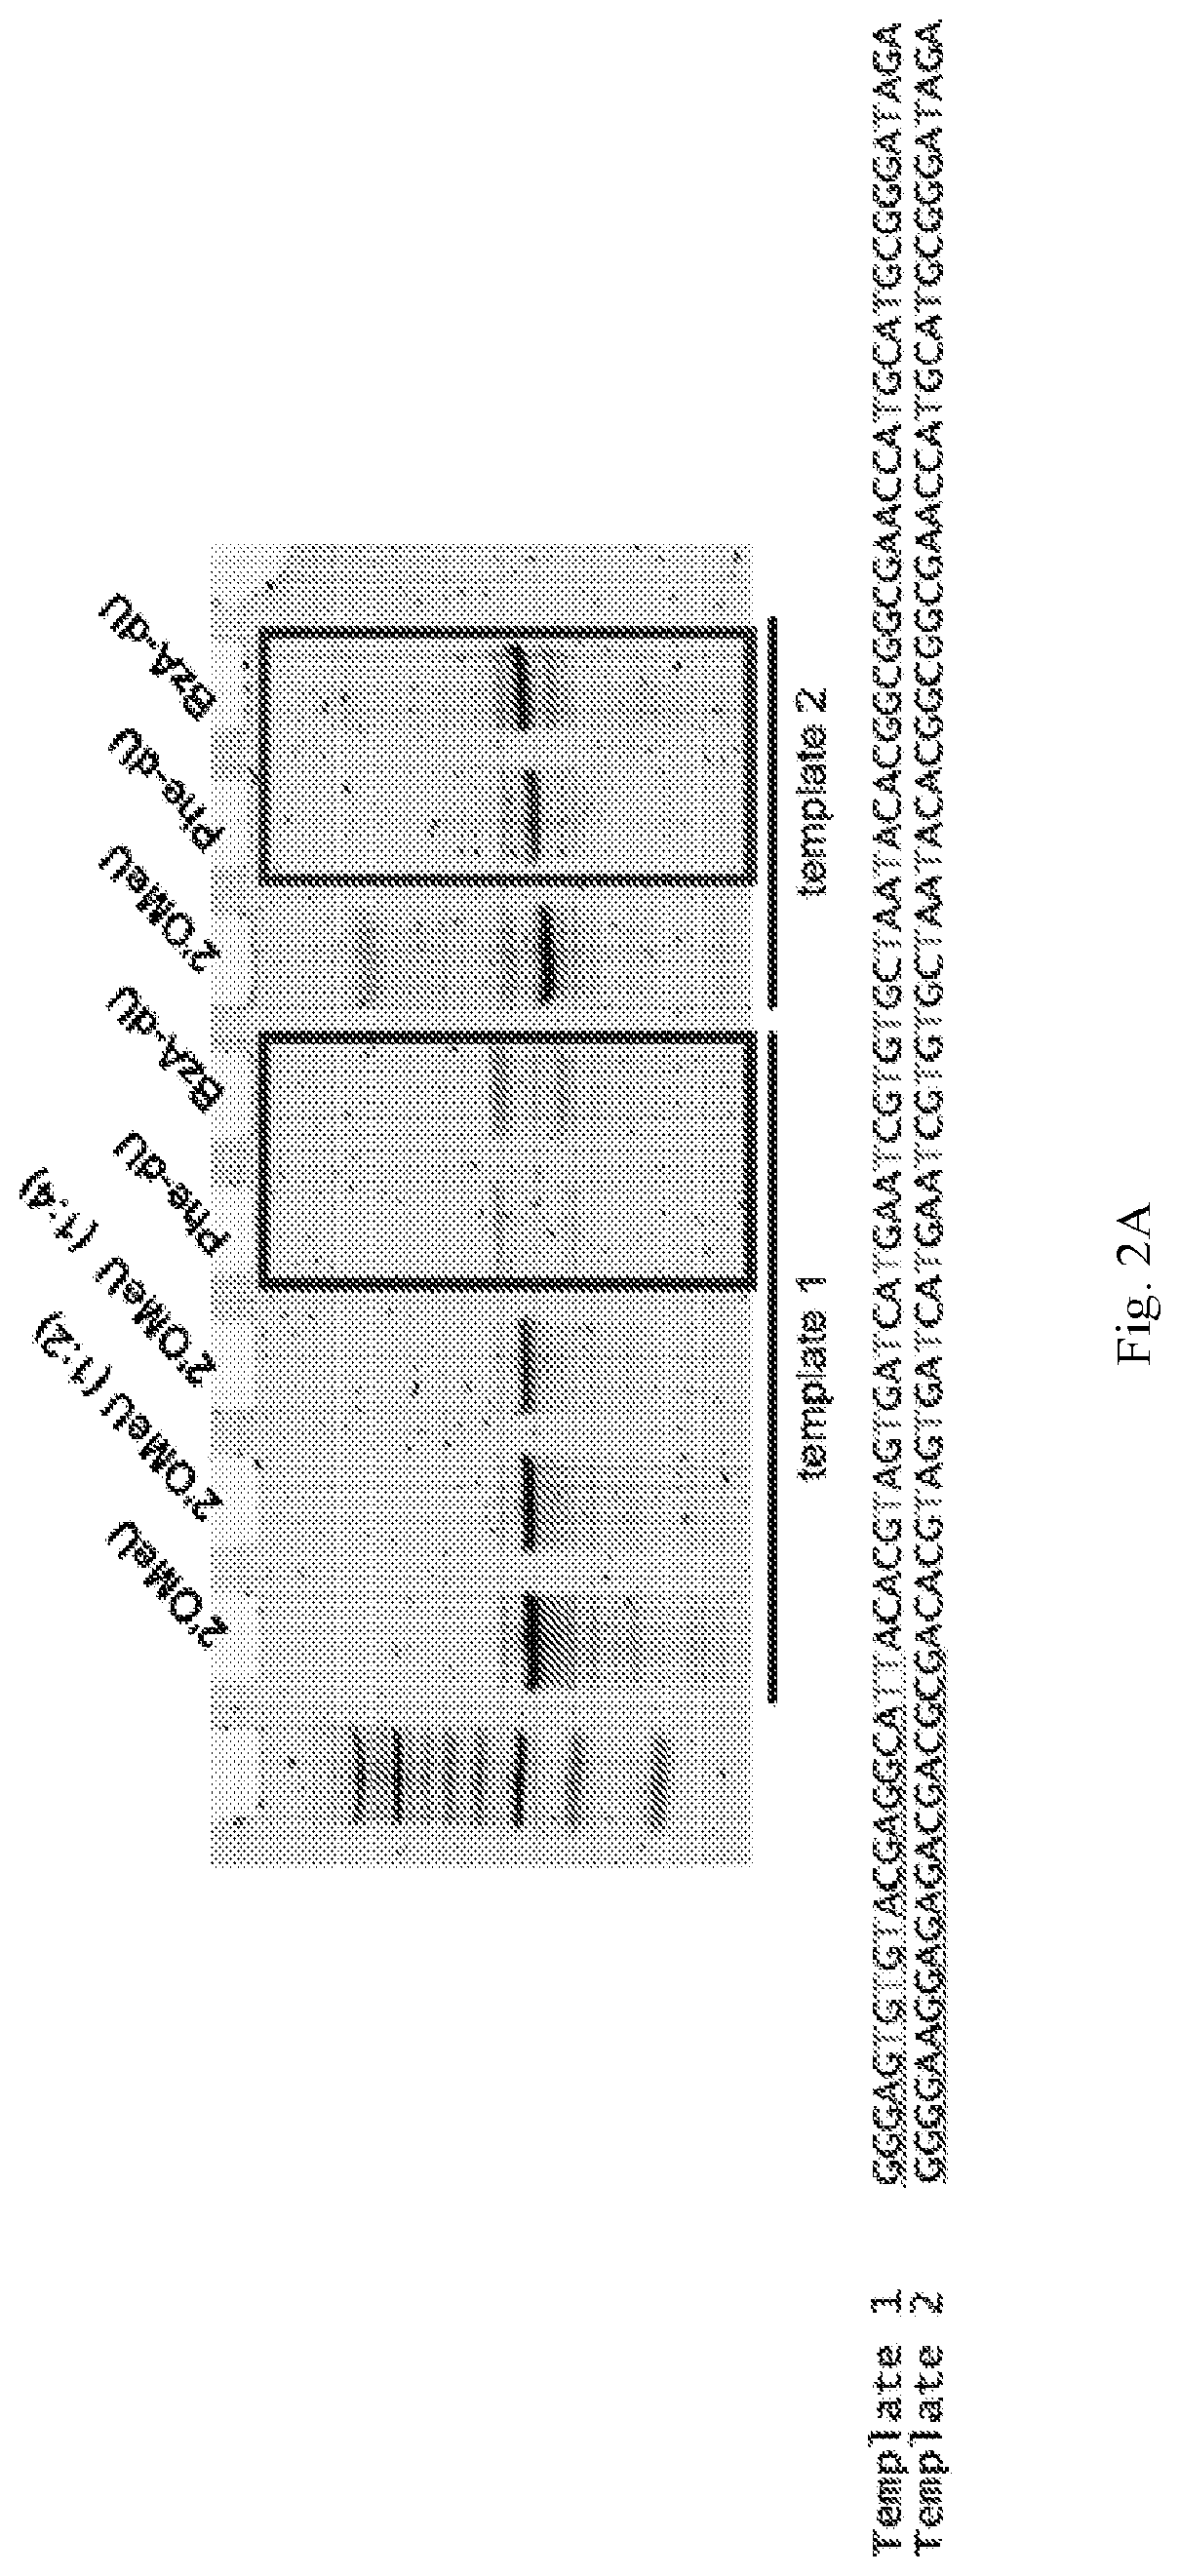 Chemically modified RNA aptamers and uses thereof